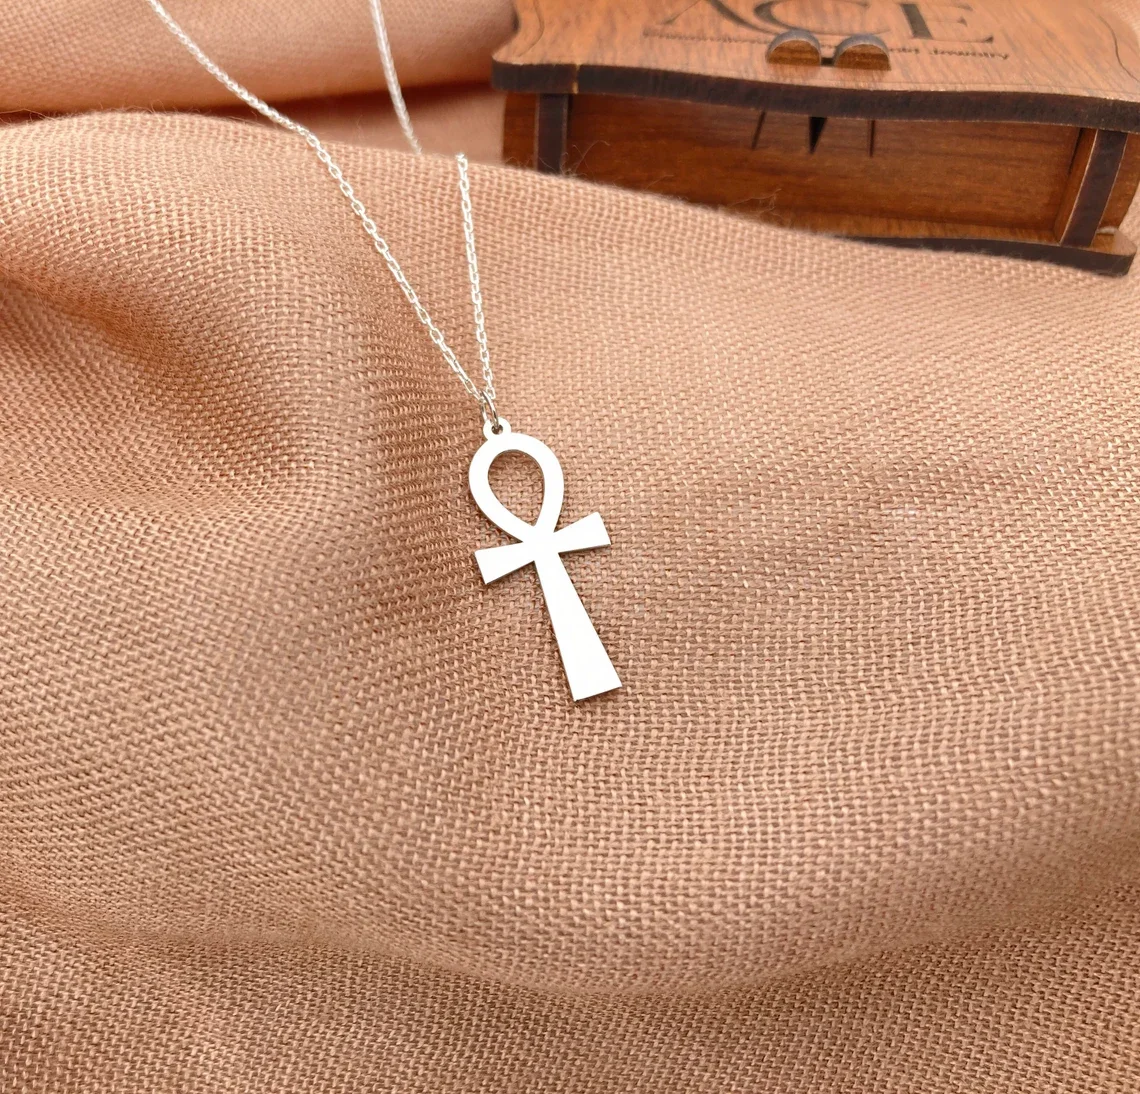 Stainless Steel Goddess Egyptian Ankh Necklace Cross Pendant Religious Clavicle Chain Statement Necklace Women Jewelry